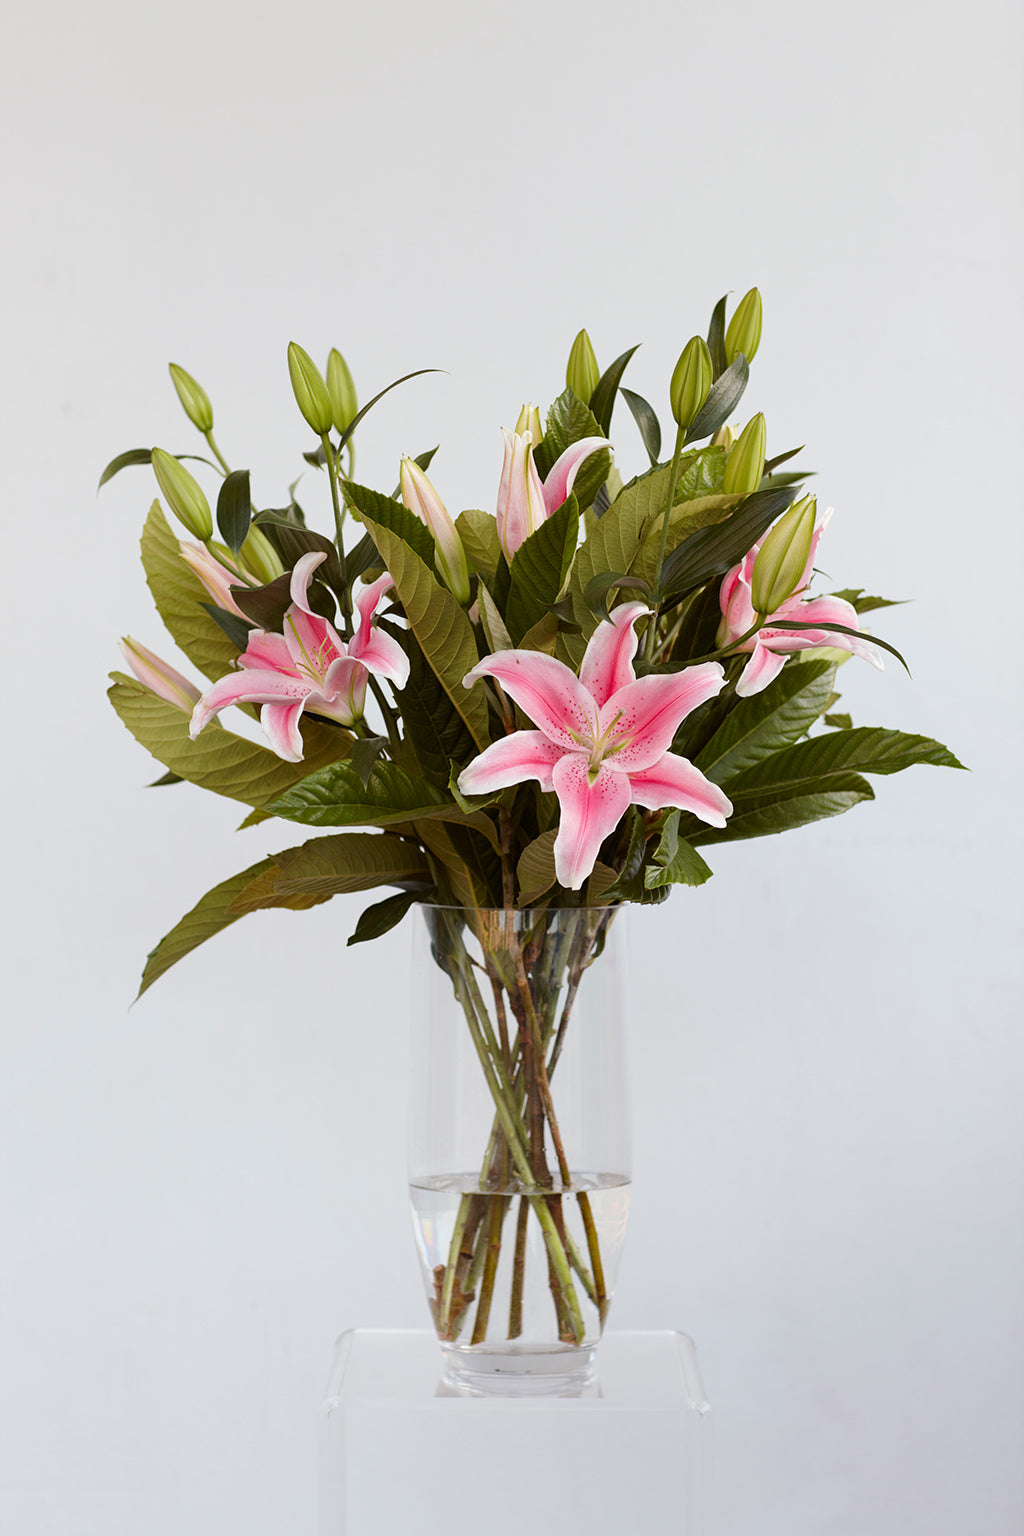 All one type of flower arrangement  (lilies) 